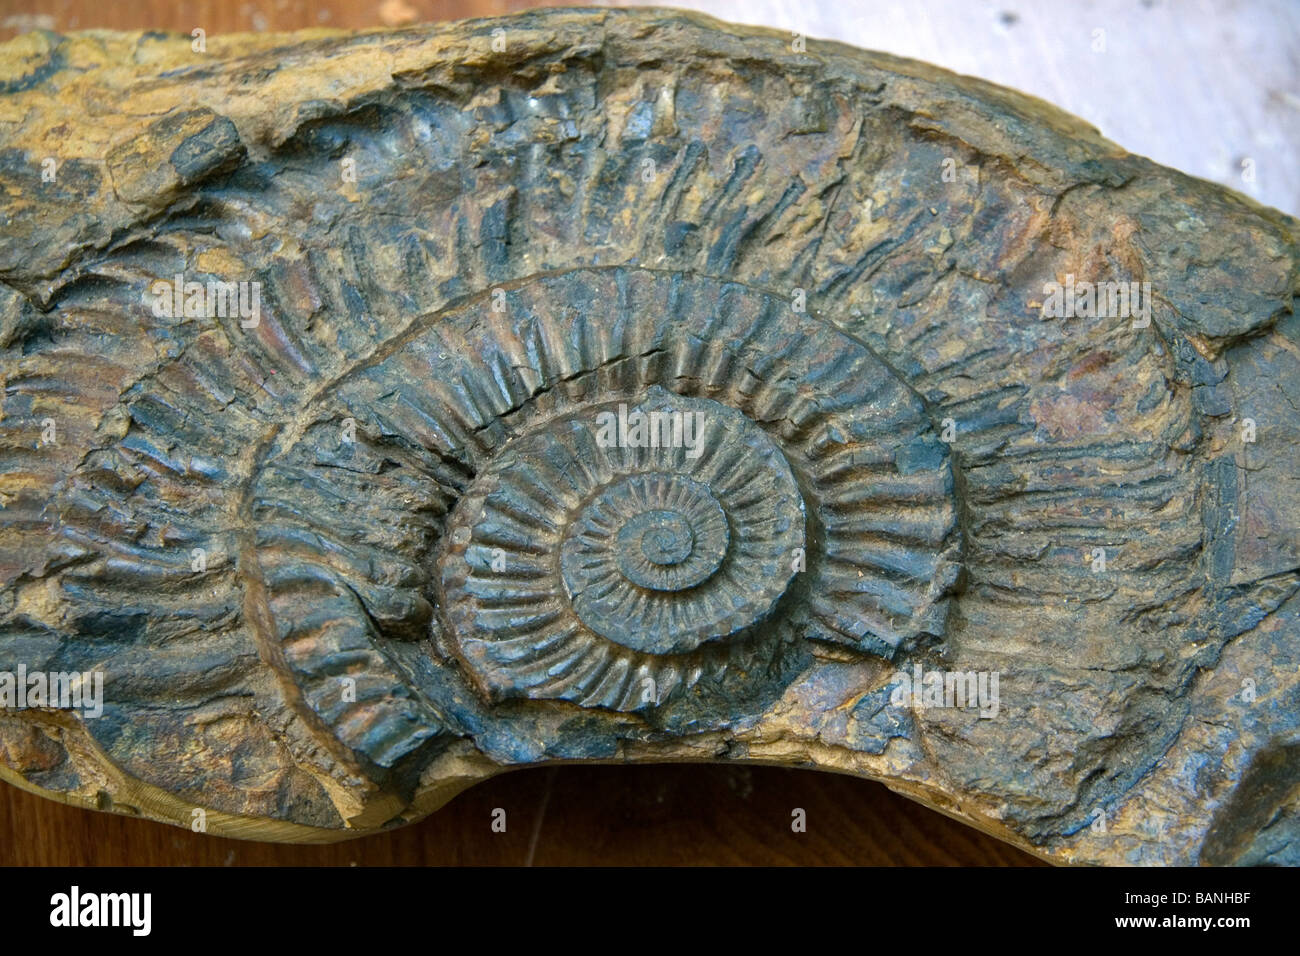 Asteroceras fossil on display at the Nguyen Hue Boulevard Flower Show in Ho Chi Minh City Vietnam Stock Photo